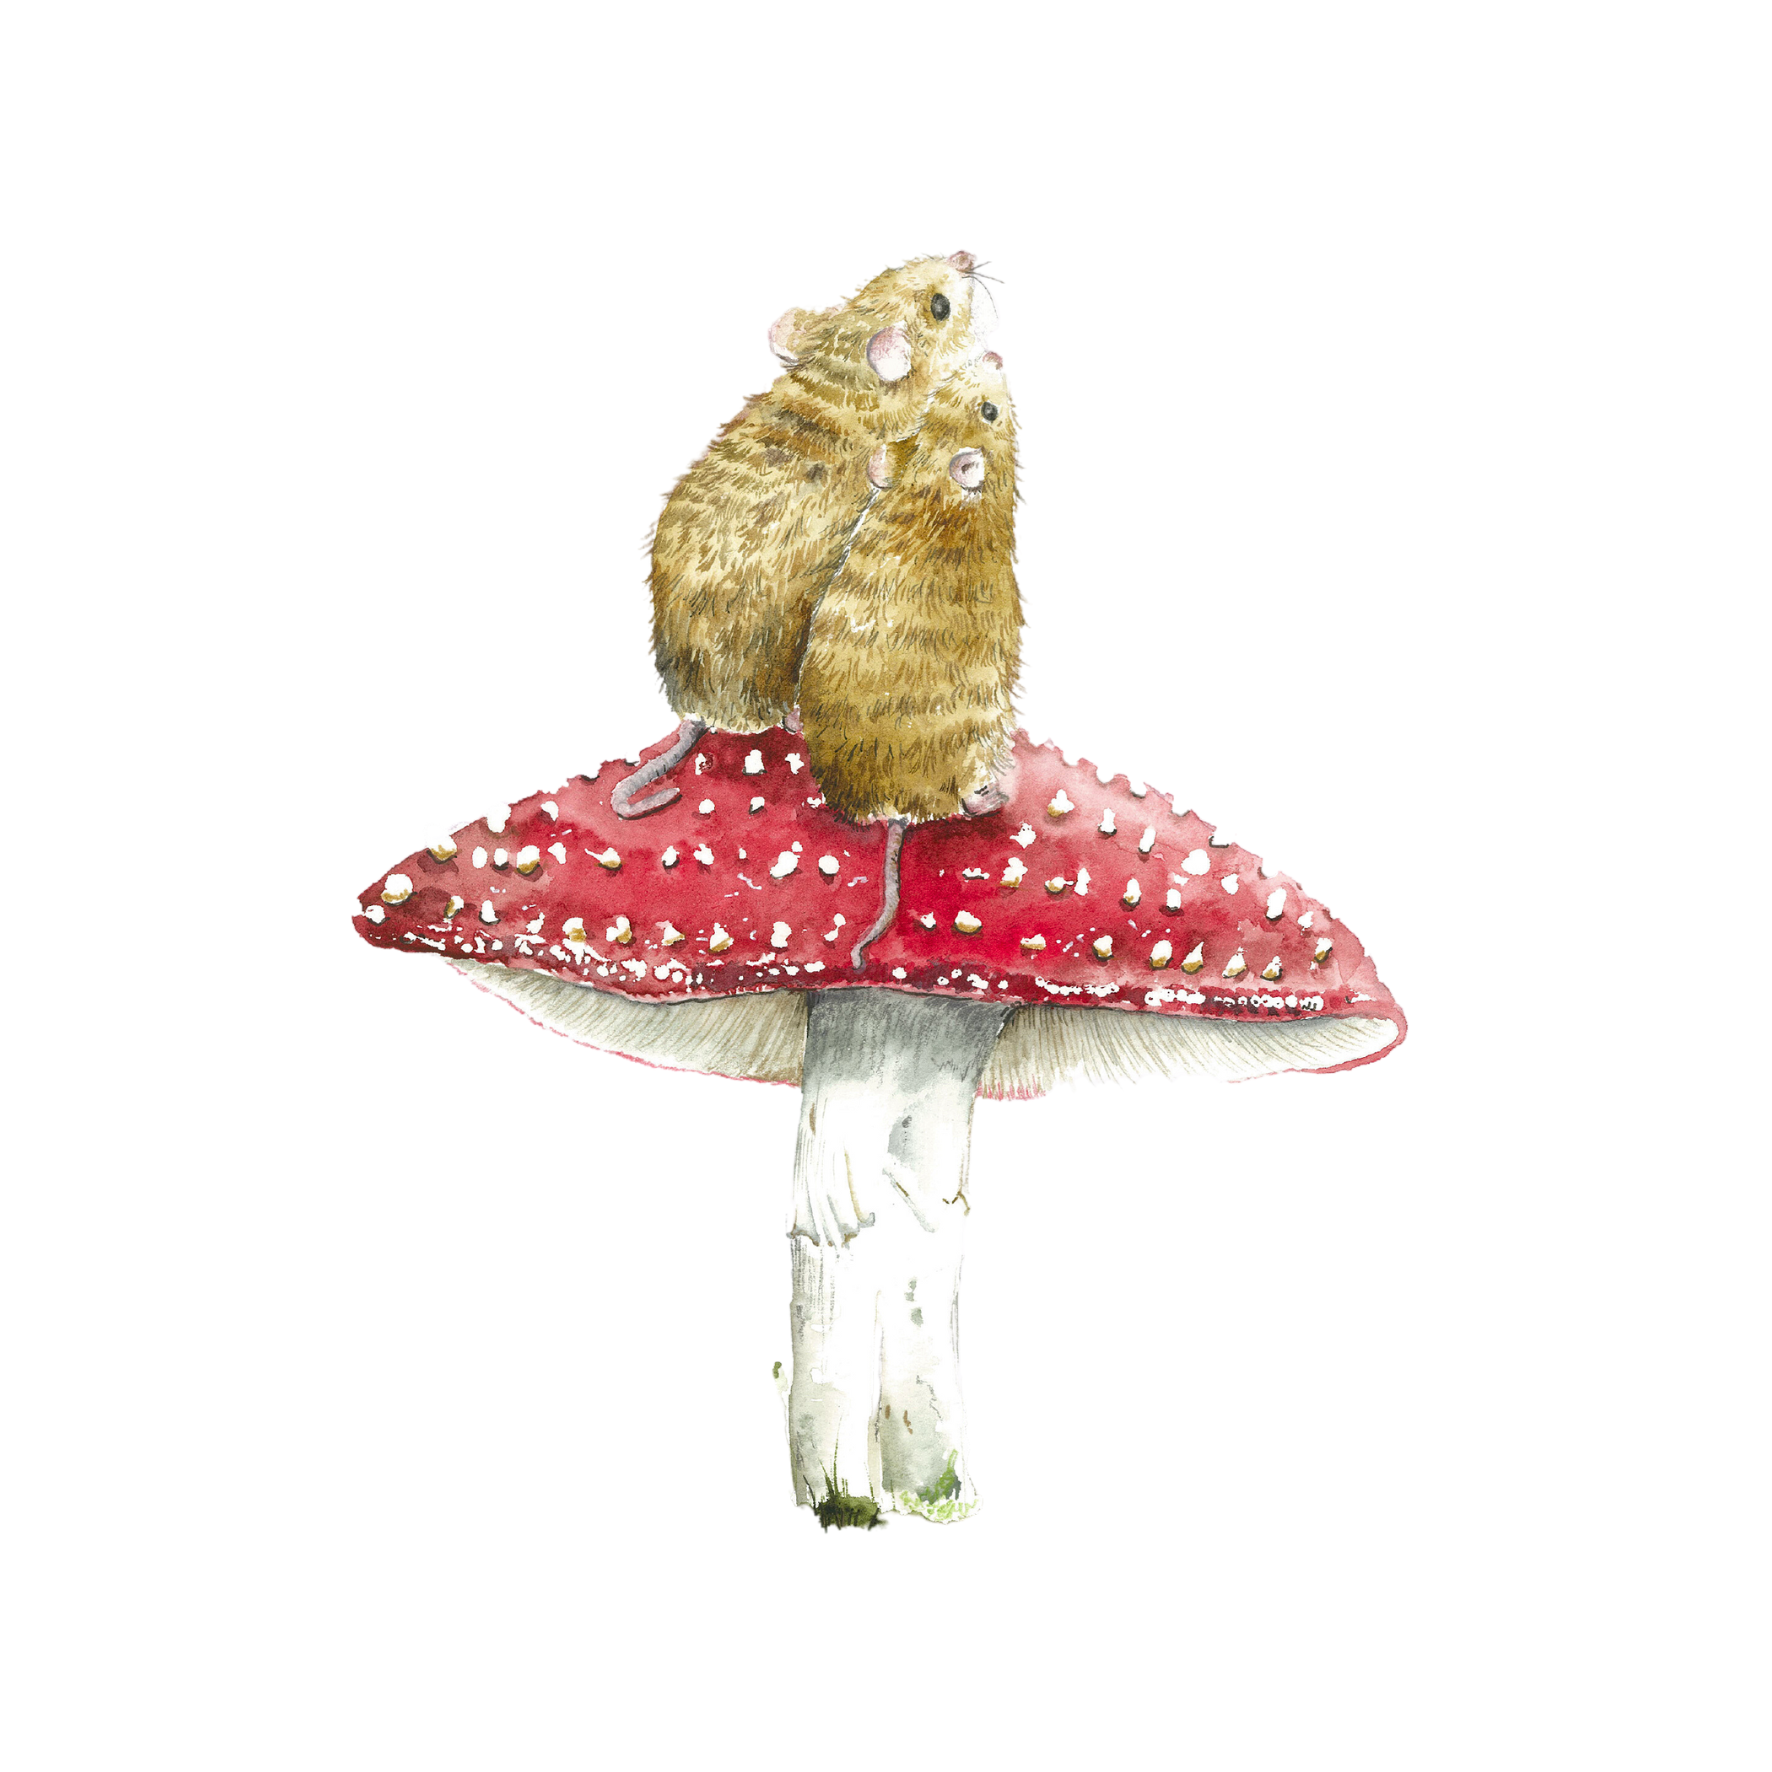 moon wishes mice on a toadstool